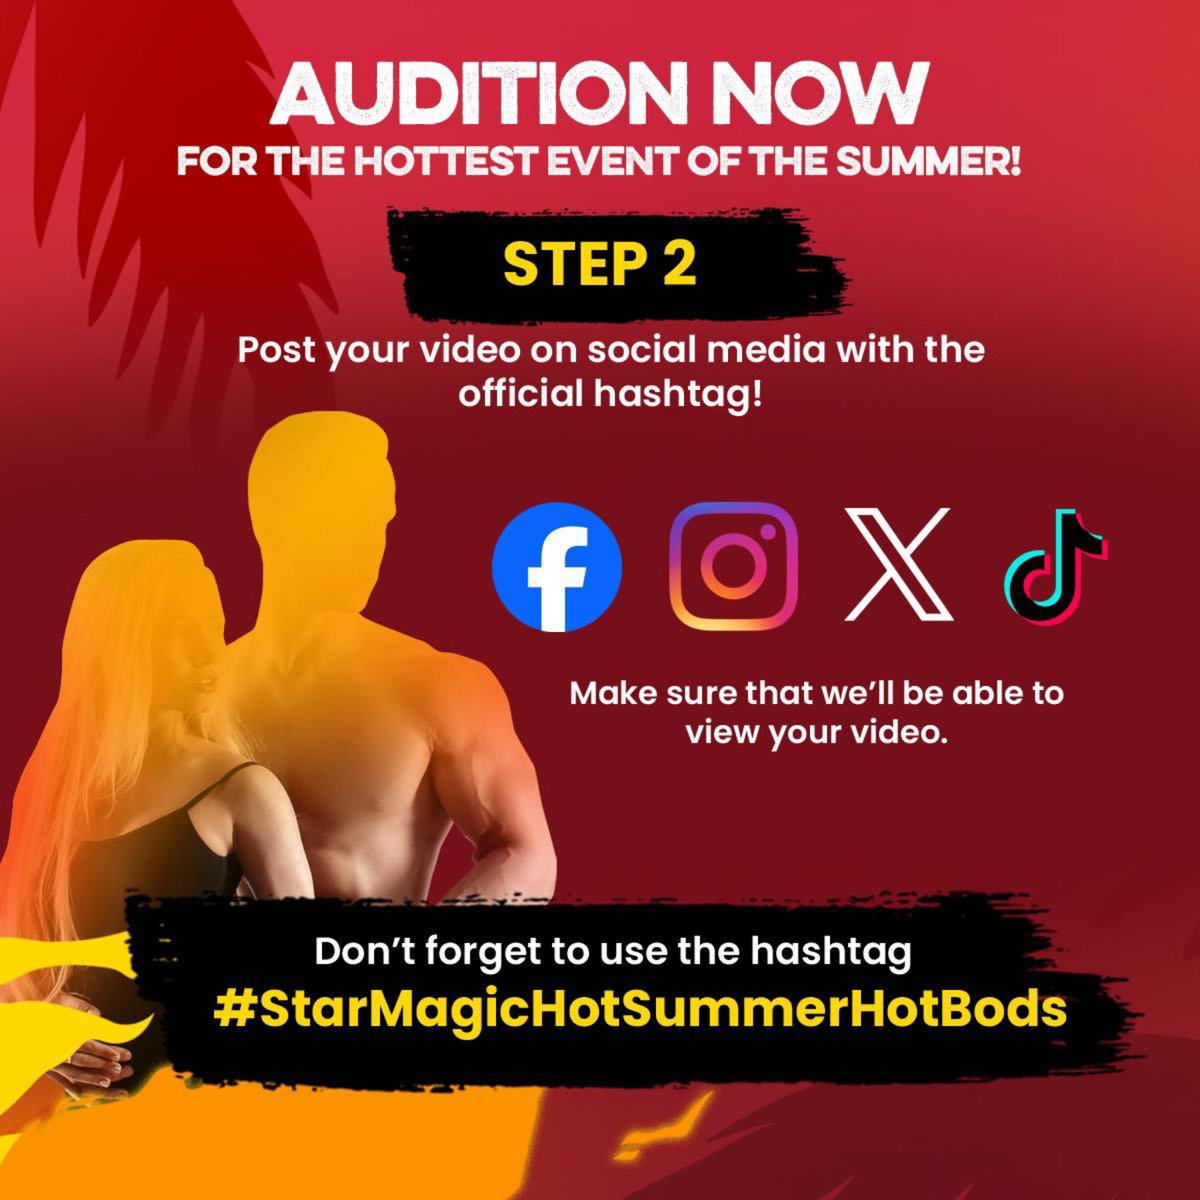 Join the hottest event of the summer-AUDITION NOW! 🔥

It’s so easy: Read the FULL MECHANICS and post a 1 to 2-minute video showcasing your hot bod and personality with the hashtag #StarMagicHotSummerHotBods!

You have until April 12 to upload your videos! #StarMagicHotSummer2024